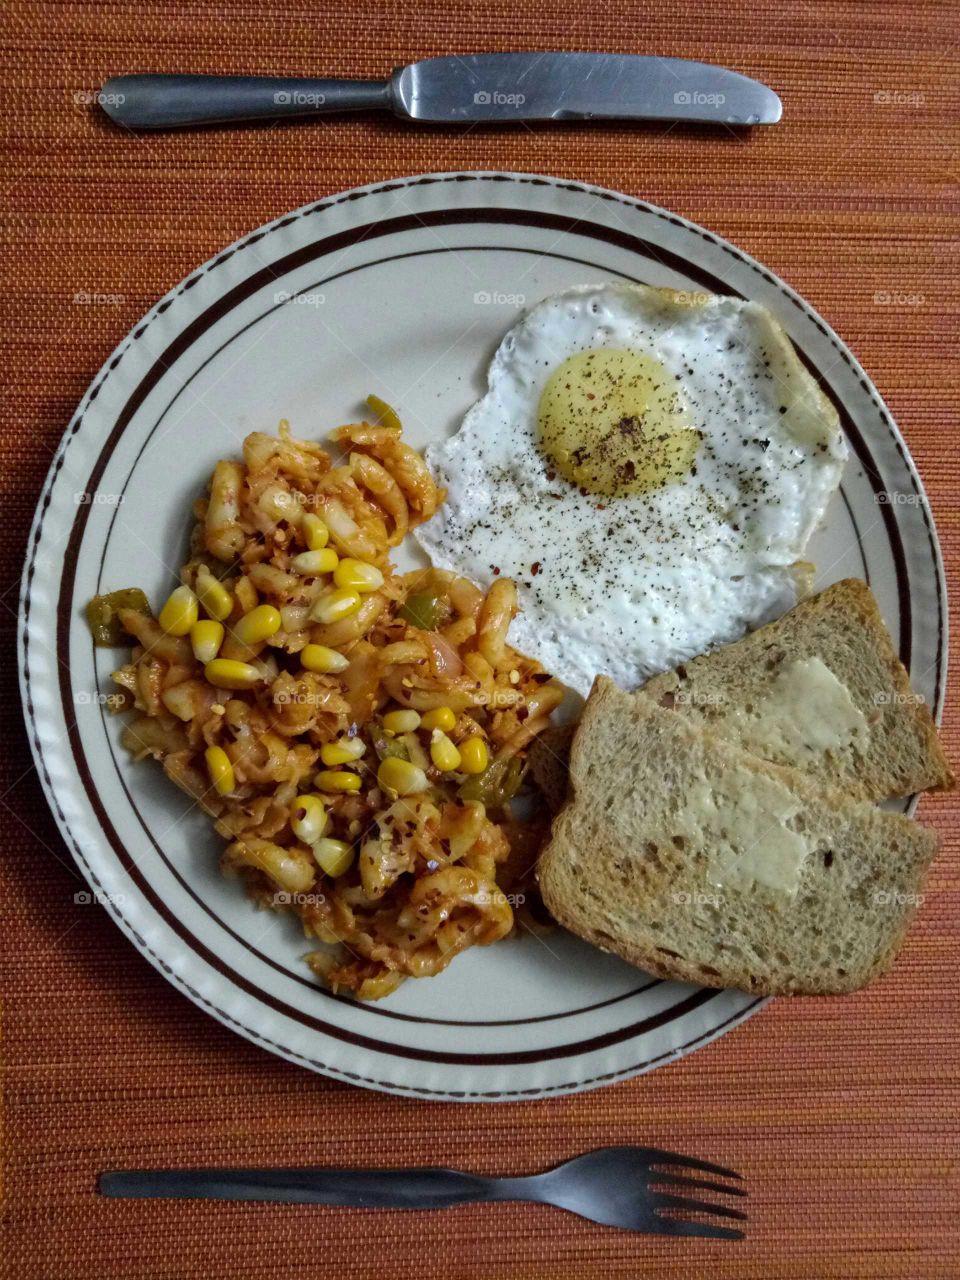 Evening light meal with pasta and half fry egg